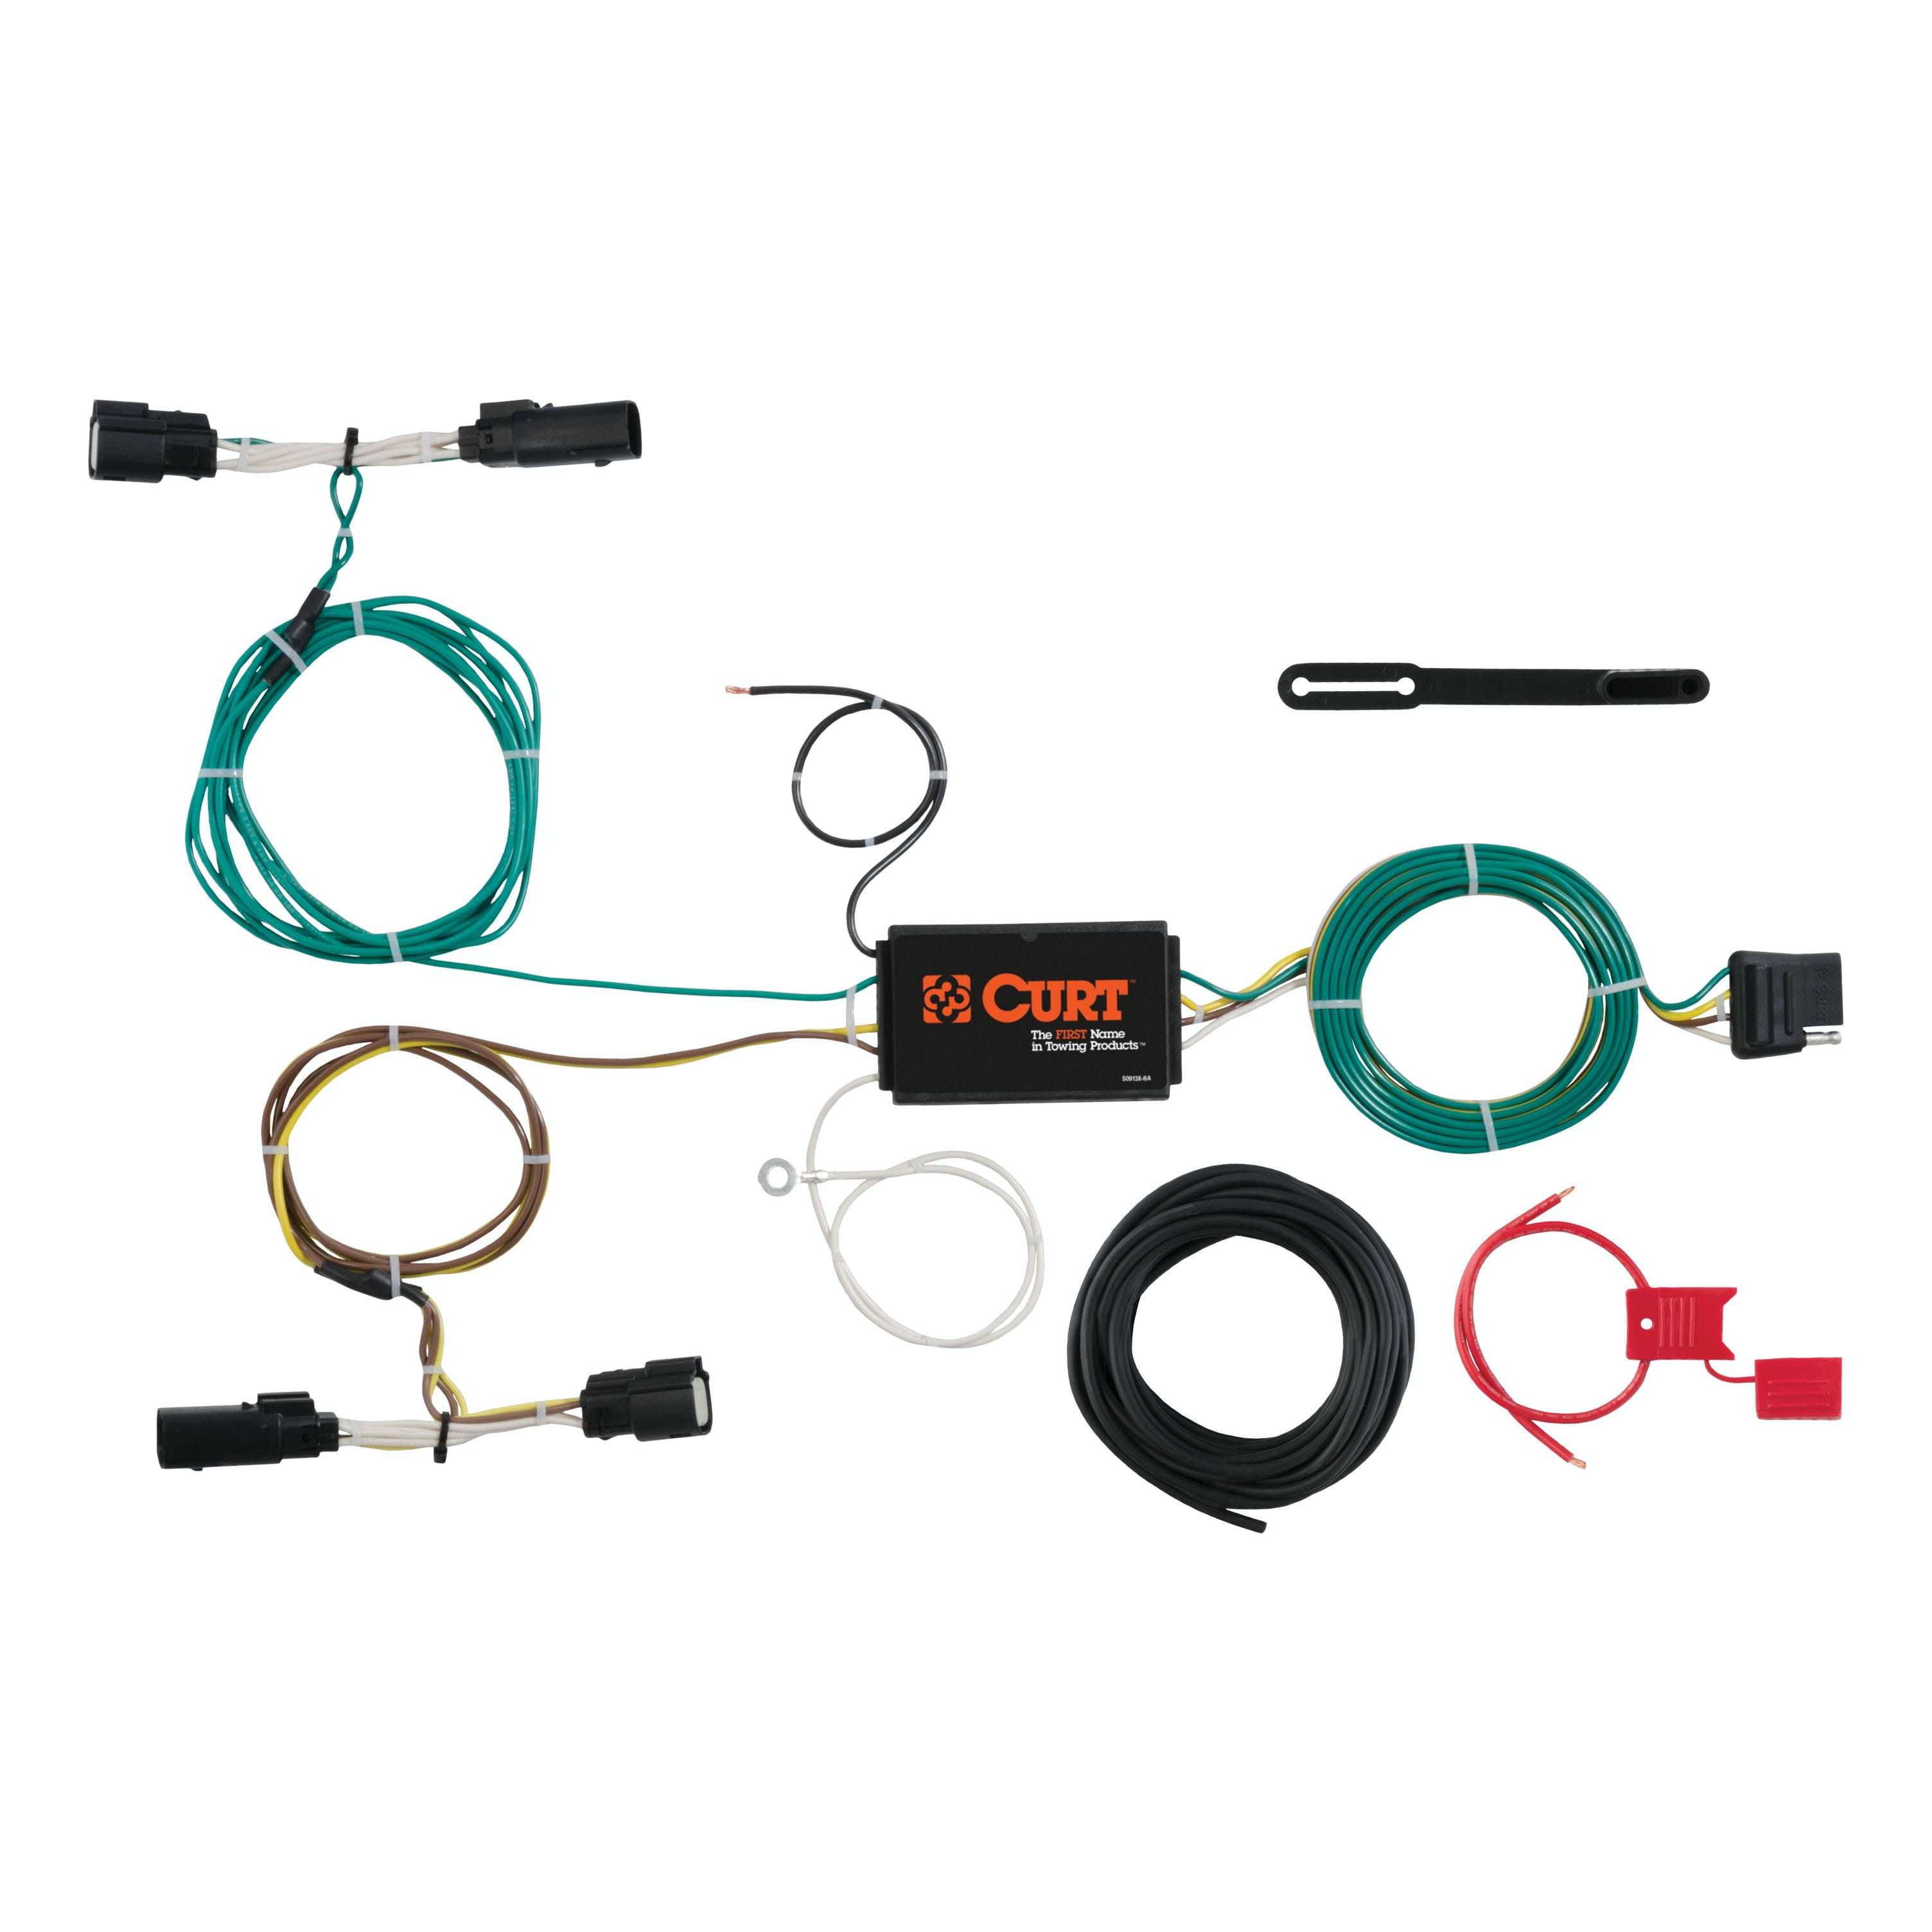 CURT 56272 Custom Wiring Harness, 4-Way Flat Output, Select Ford Edge